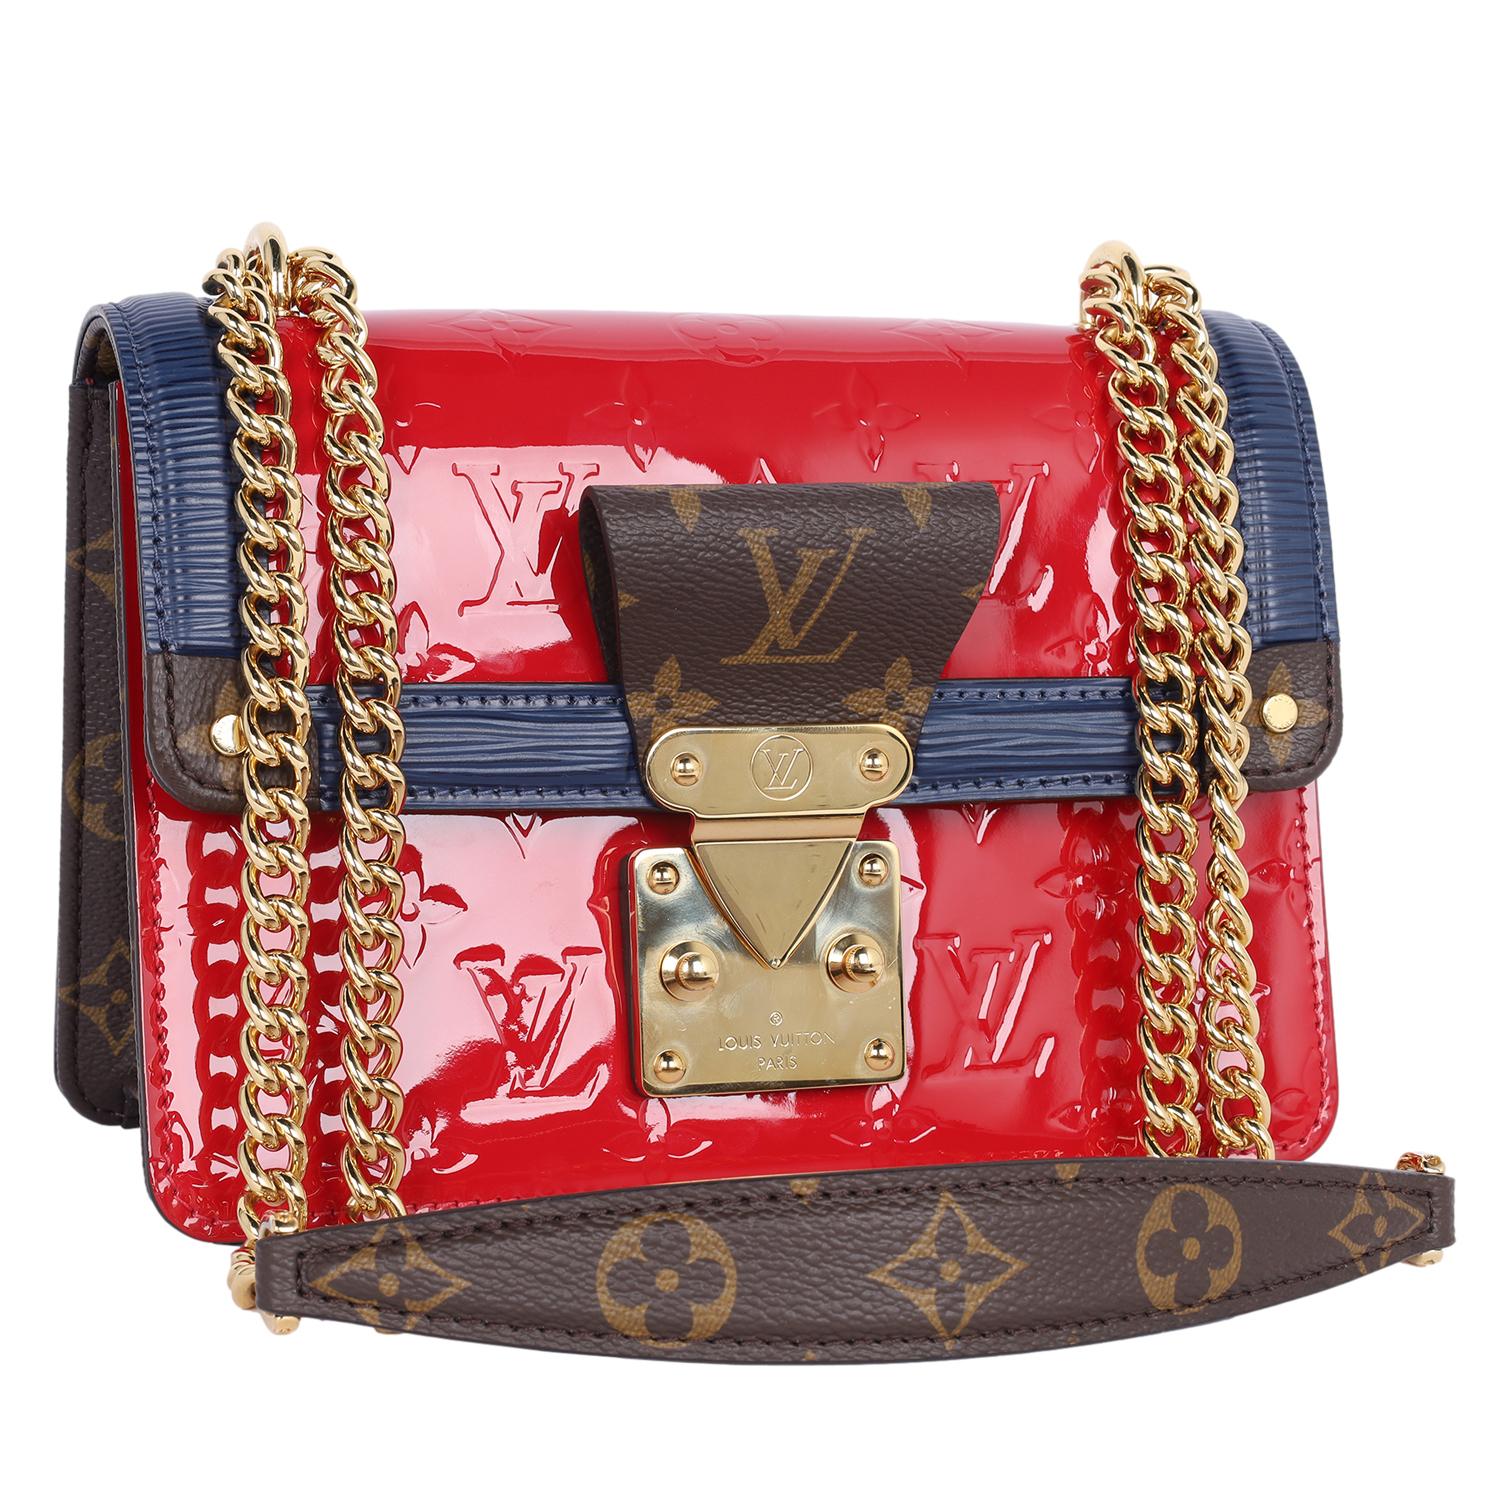 Louis Vuitton Vernis Epi Leather Monogram Wynwood Crossbody Red In Excellent Condition For Sale In Salt Lake Cty, UT